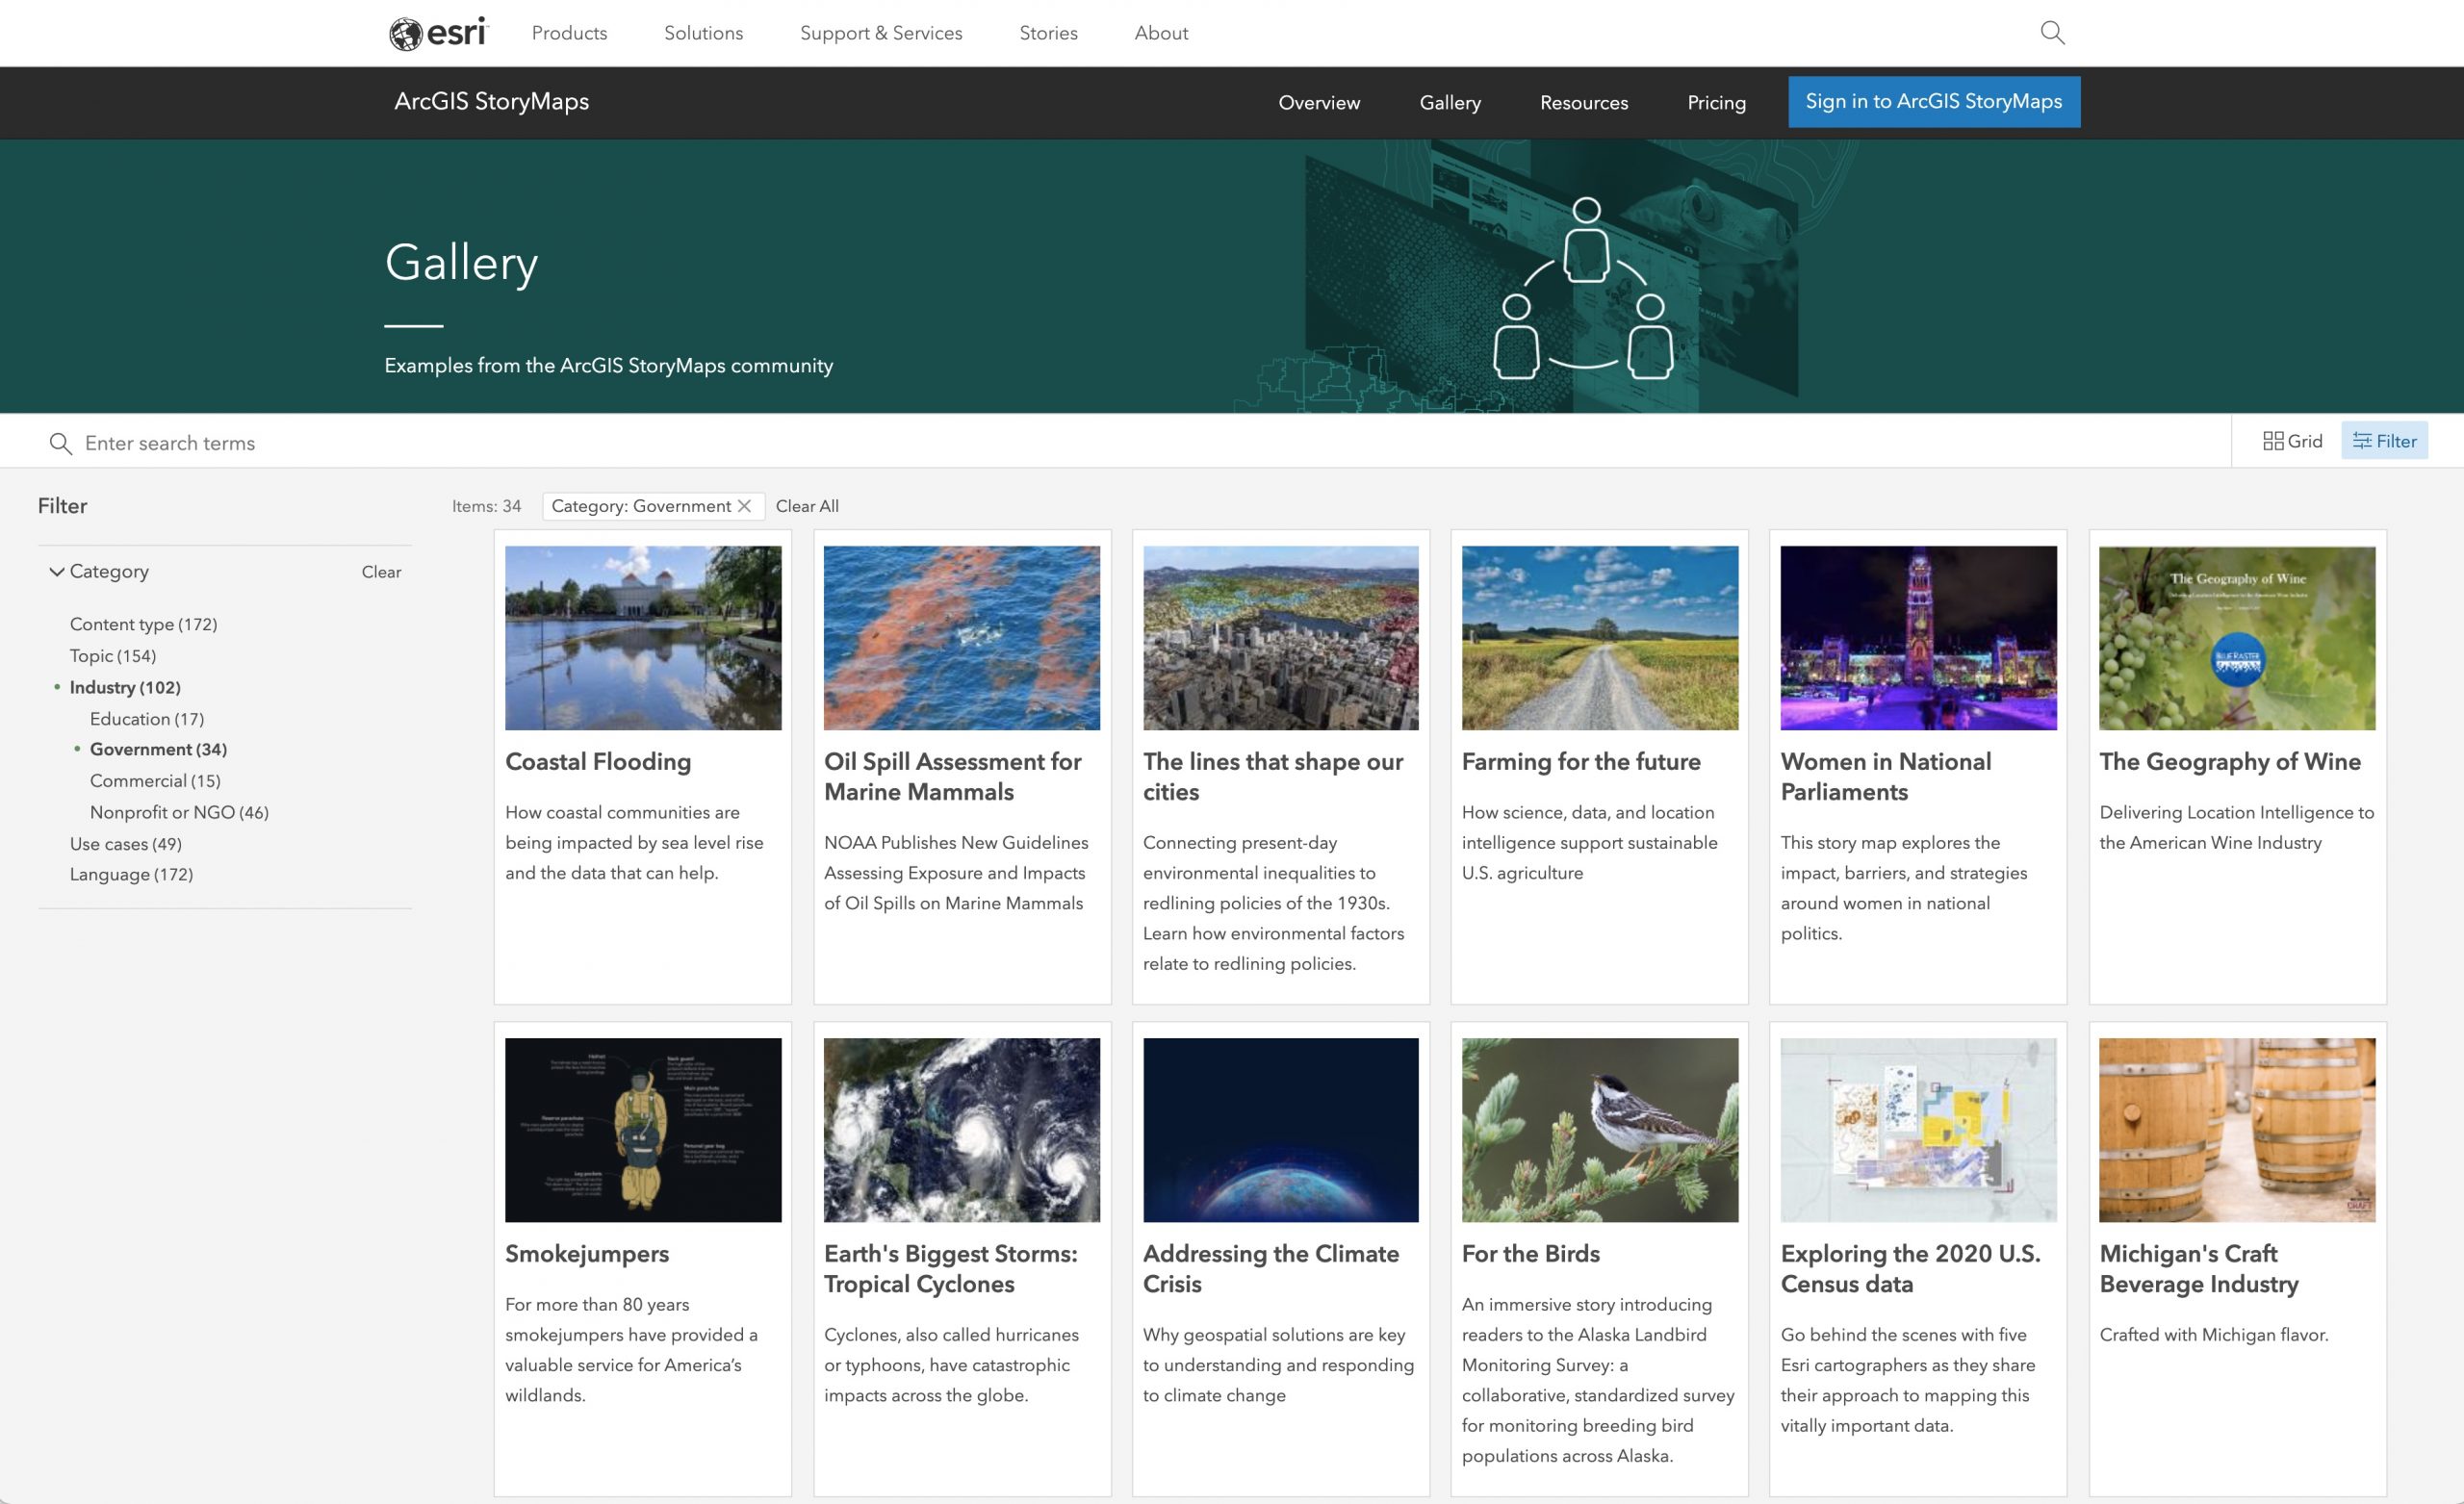 The StoryMaps gallery showing stories from government organizations